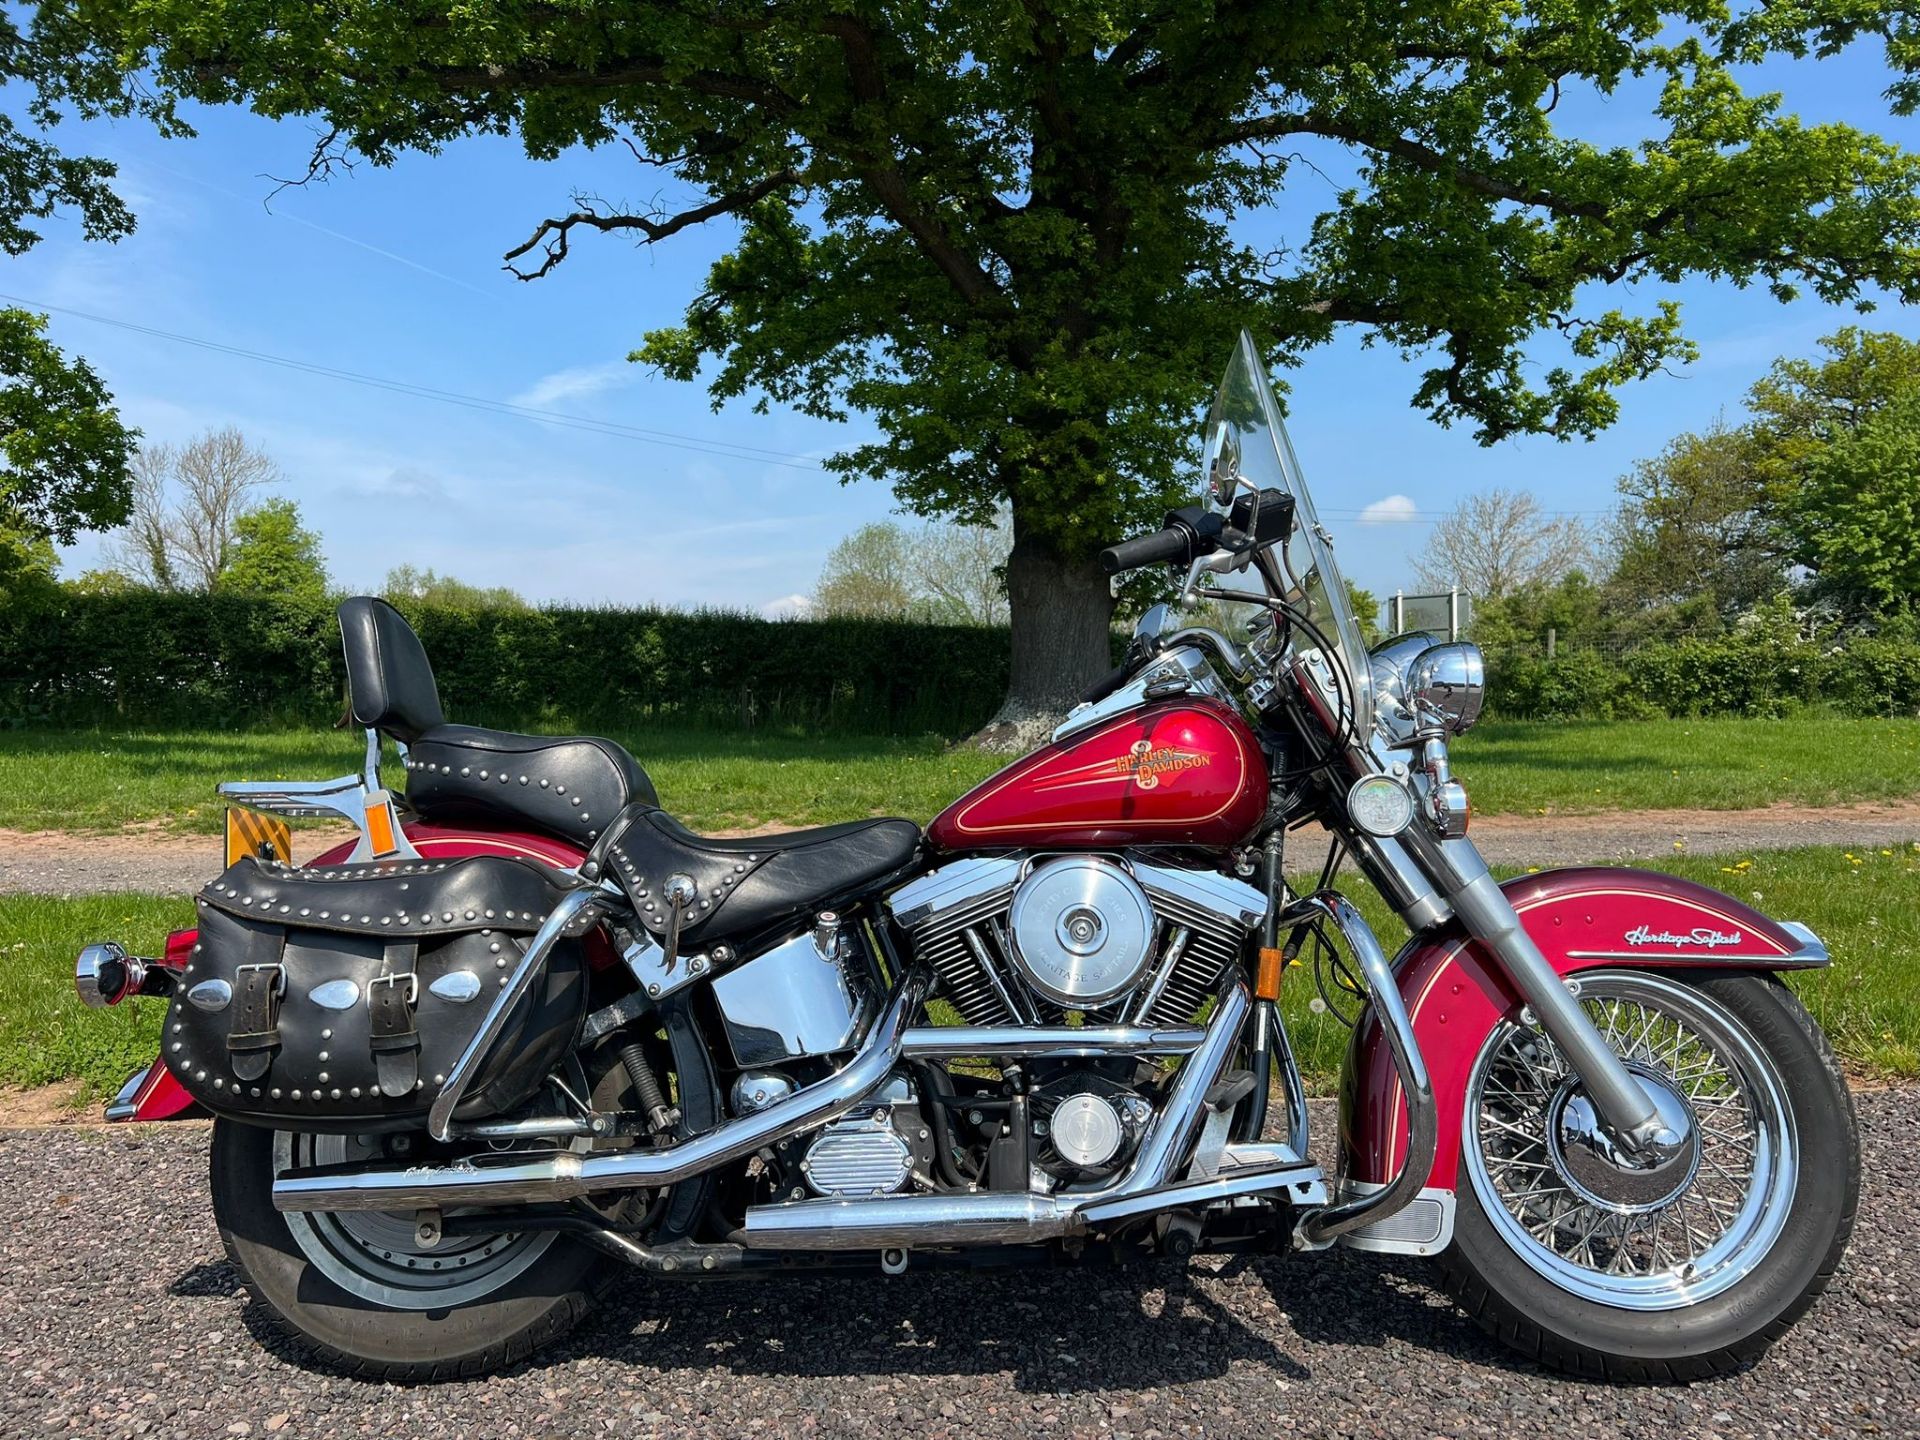 Harley Davidson FLSTC Heritage Softail motorcycle. 1995. 1340cc. Runs and rides well, ridden to - Image 2 of 11